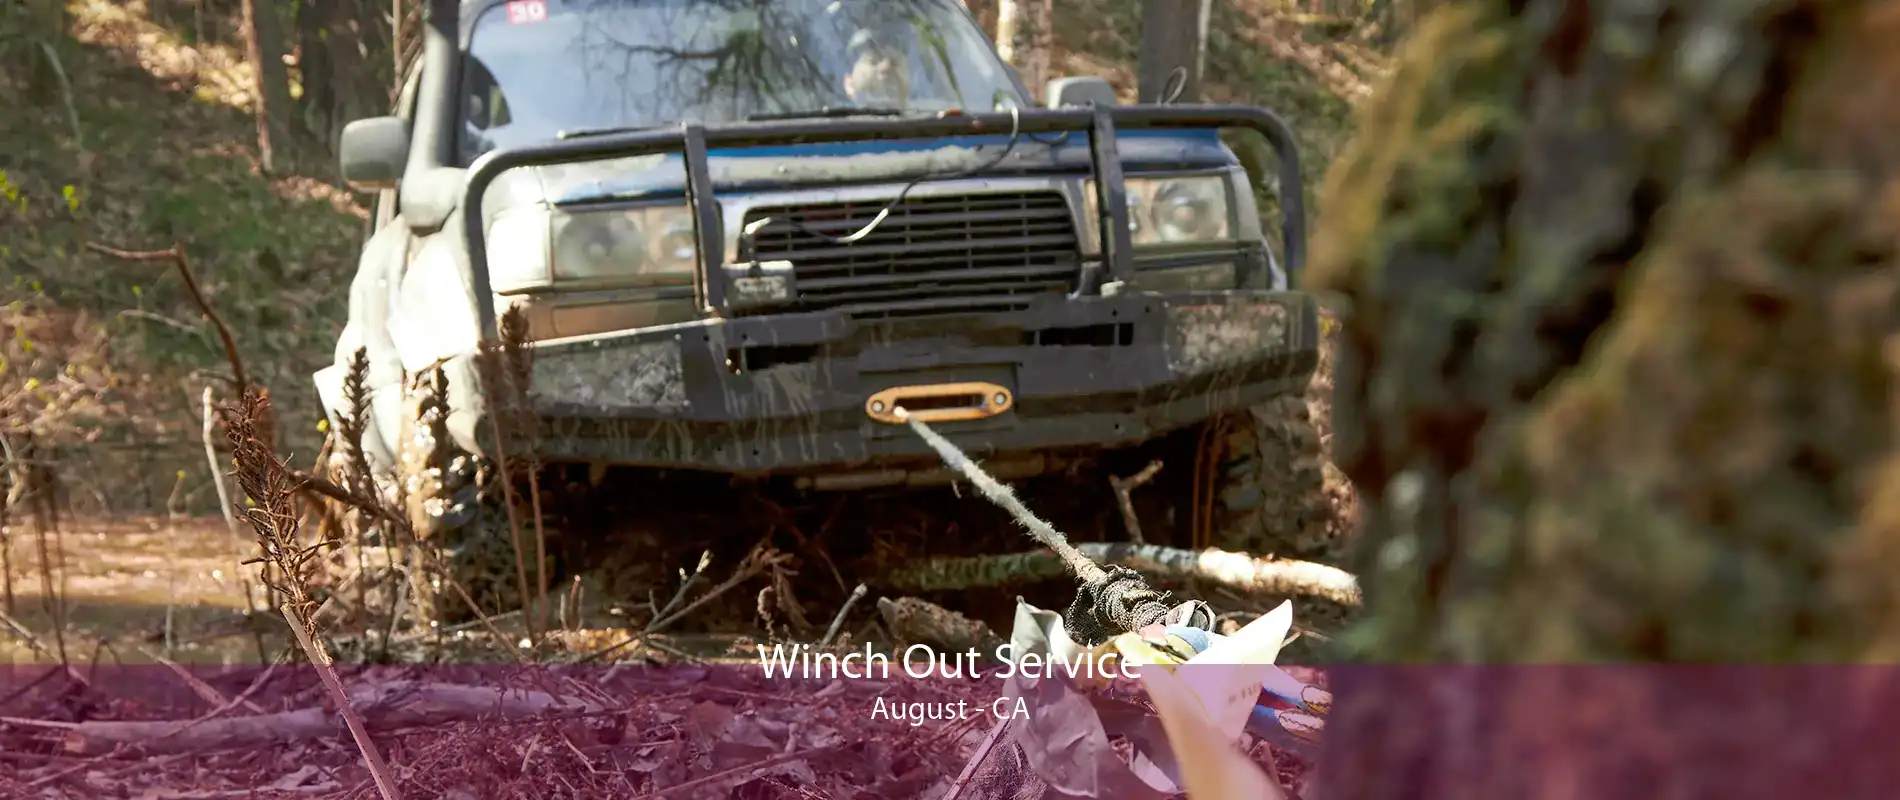 Winch Out Service August - CA